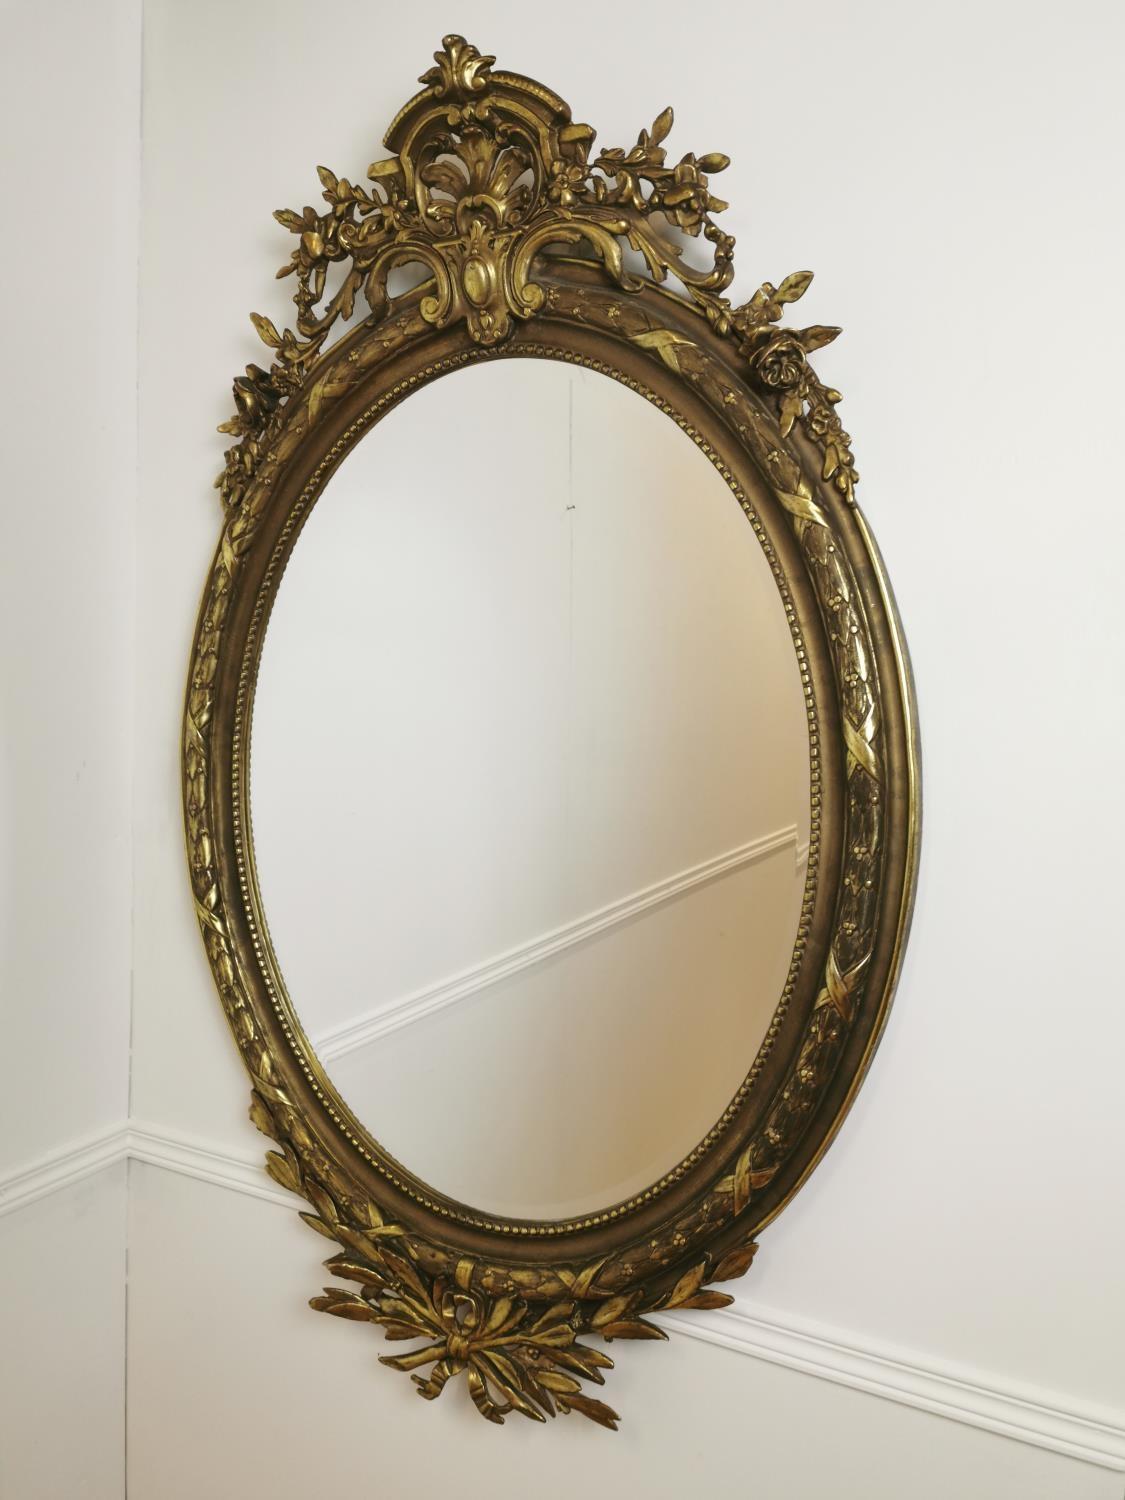 Good quality giltwood and gesso wall mirror